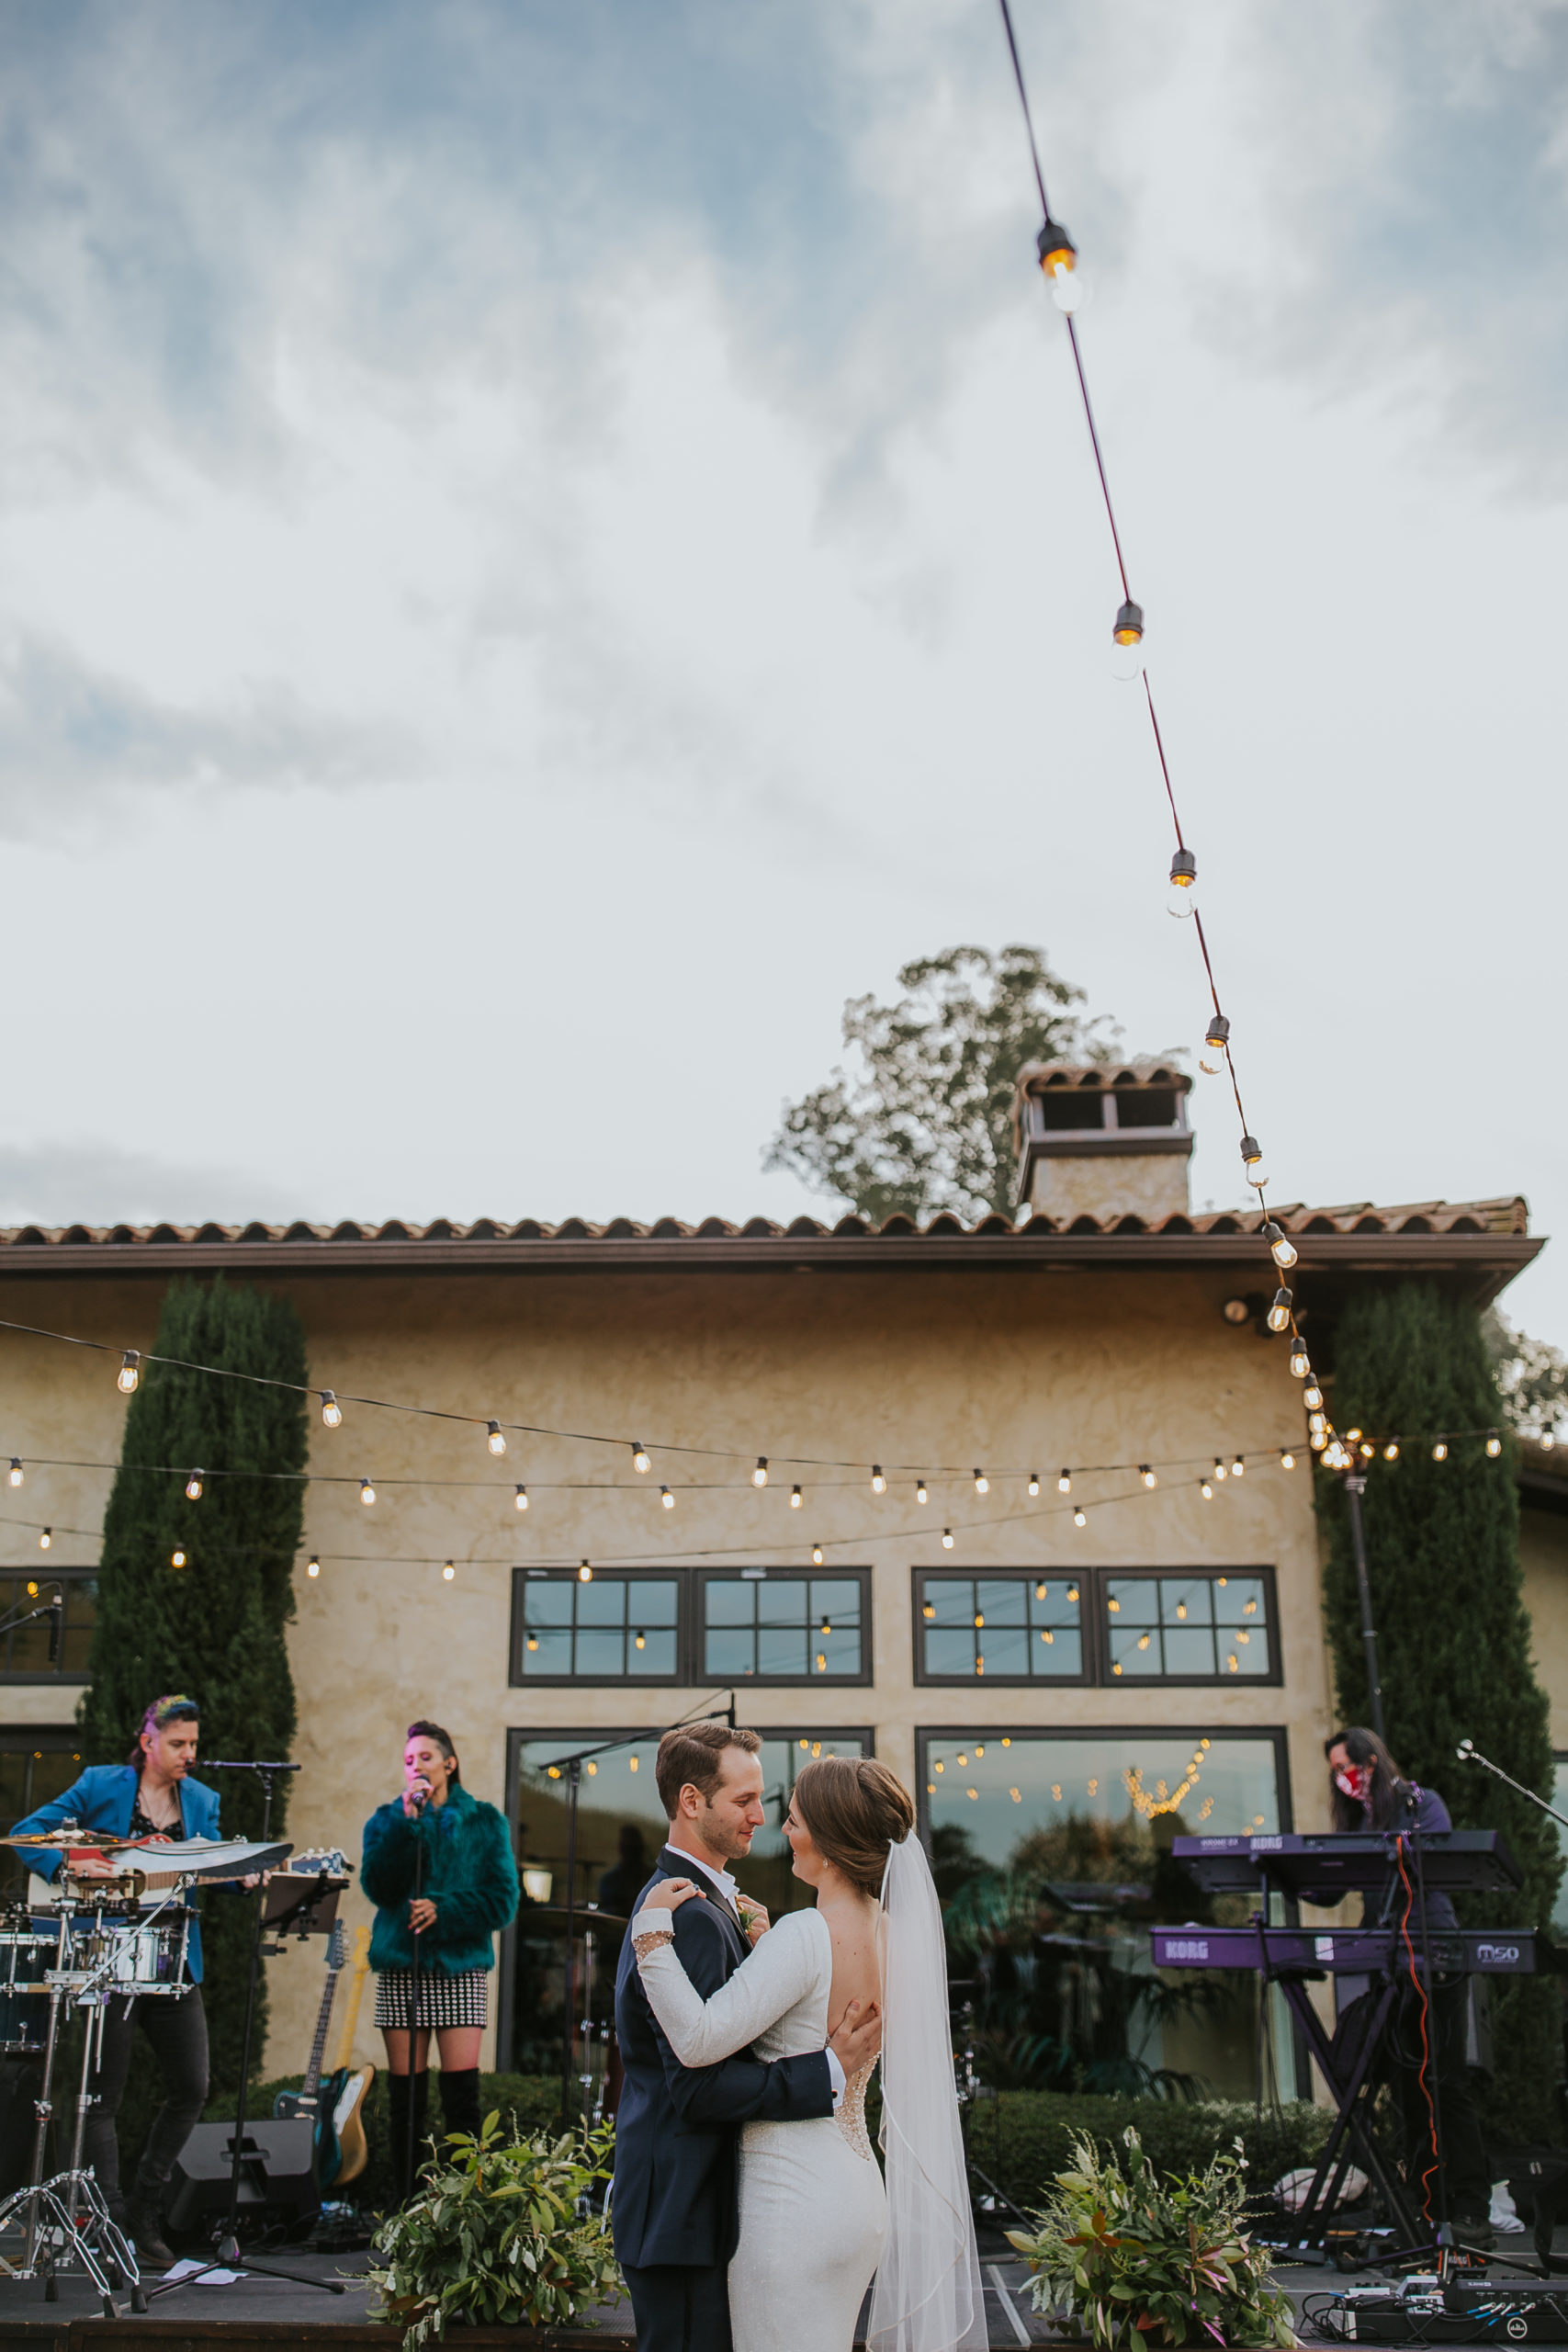 rebecca skidgel photography wine country wedding photographer healdsburg vineyards bride and groom first dance smiling holding each other